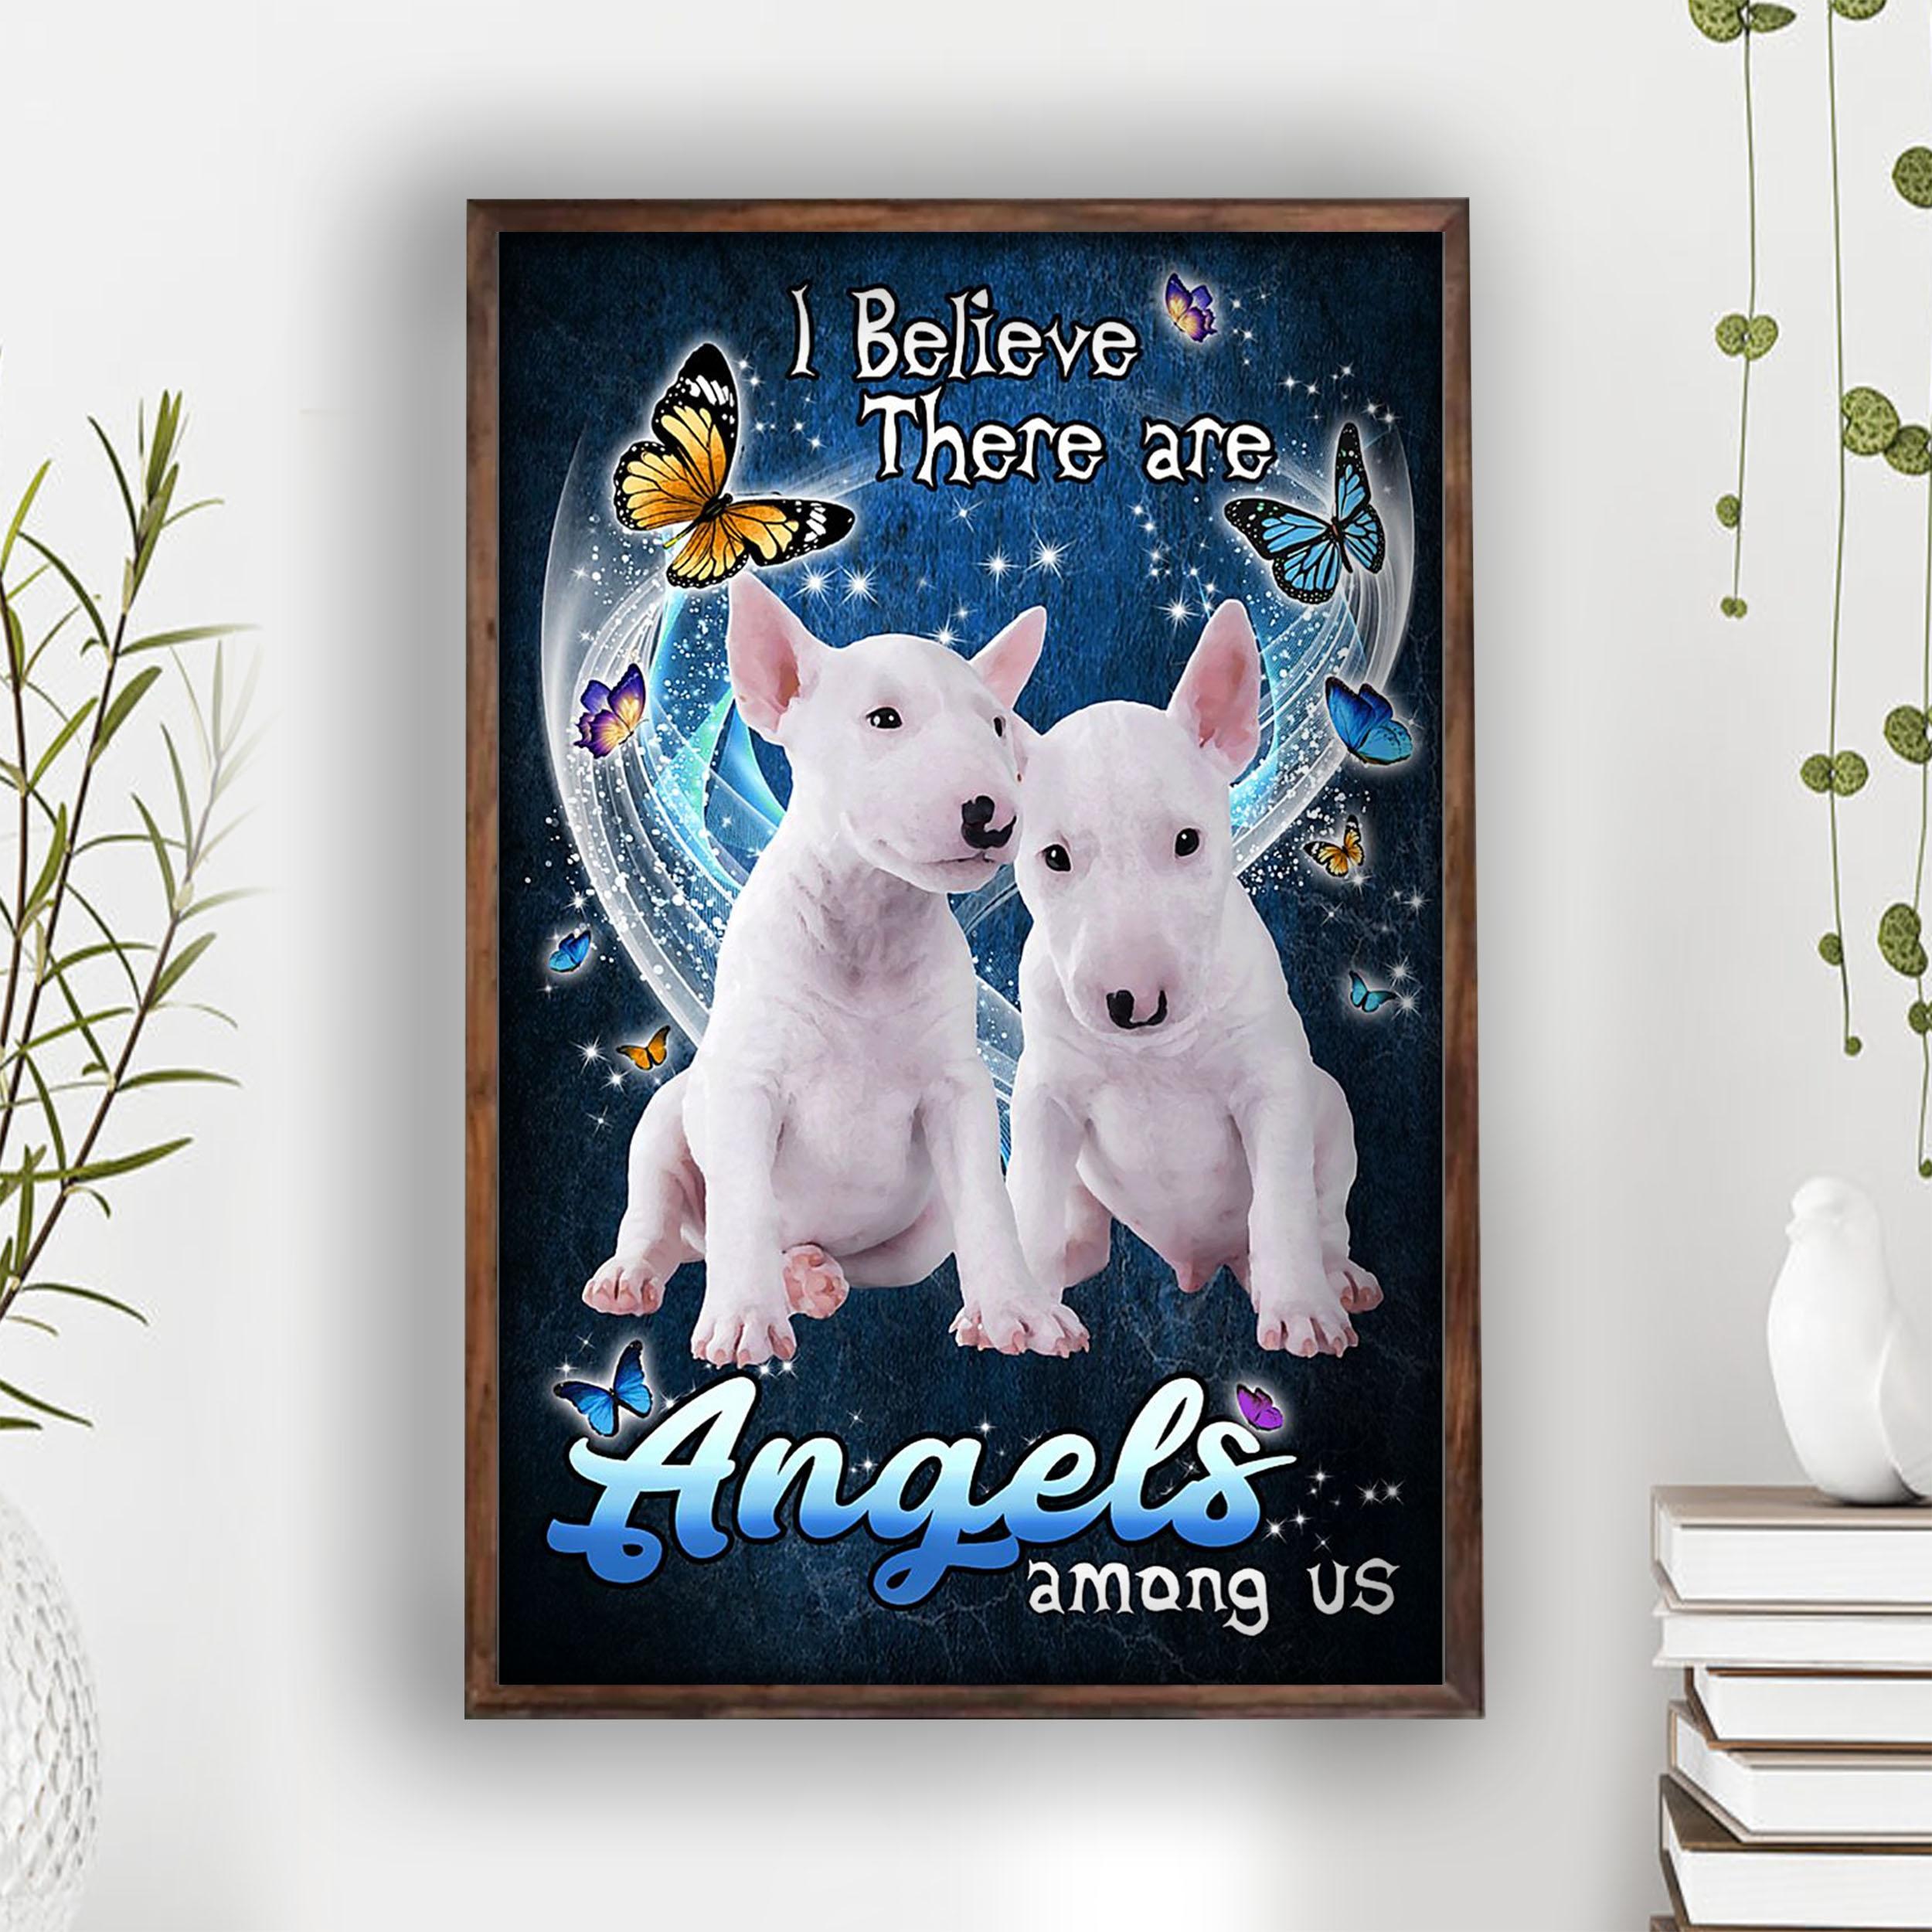 Bull Terrier Poster Bull Terrier Lovers I Believe There Are Angels Among US Wall Art Home Decor Poster Print